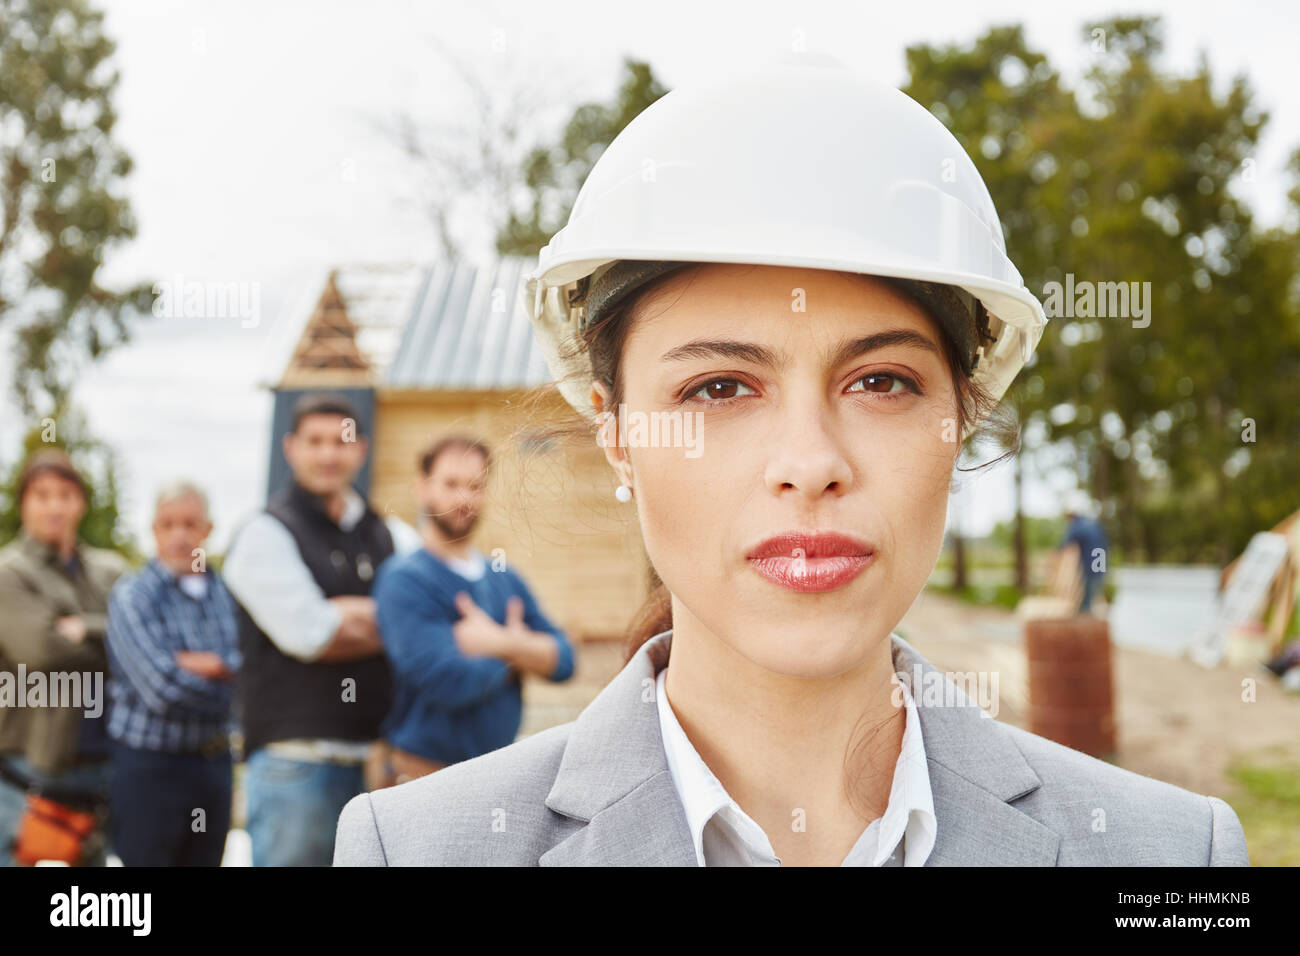 Young self confident woman as architect with competence Stock Photo